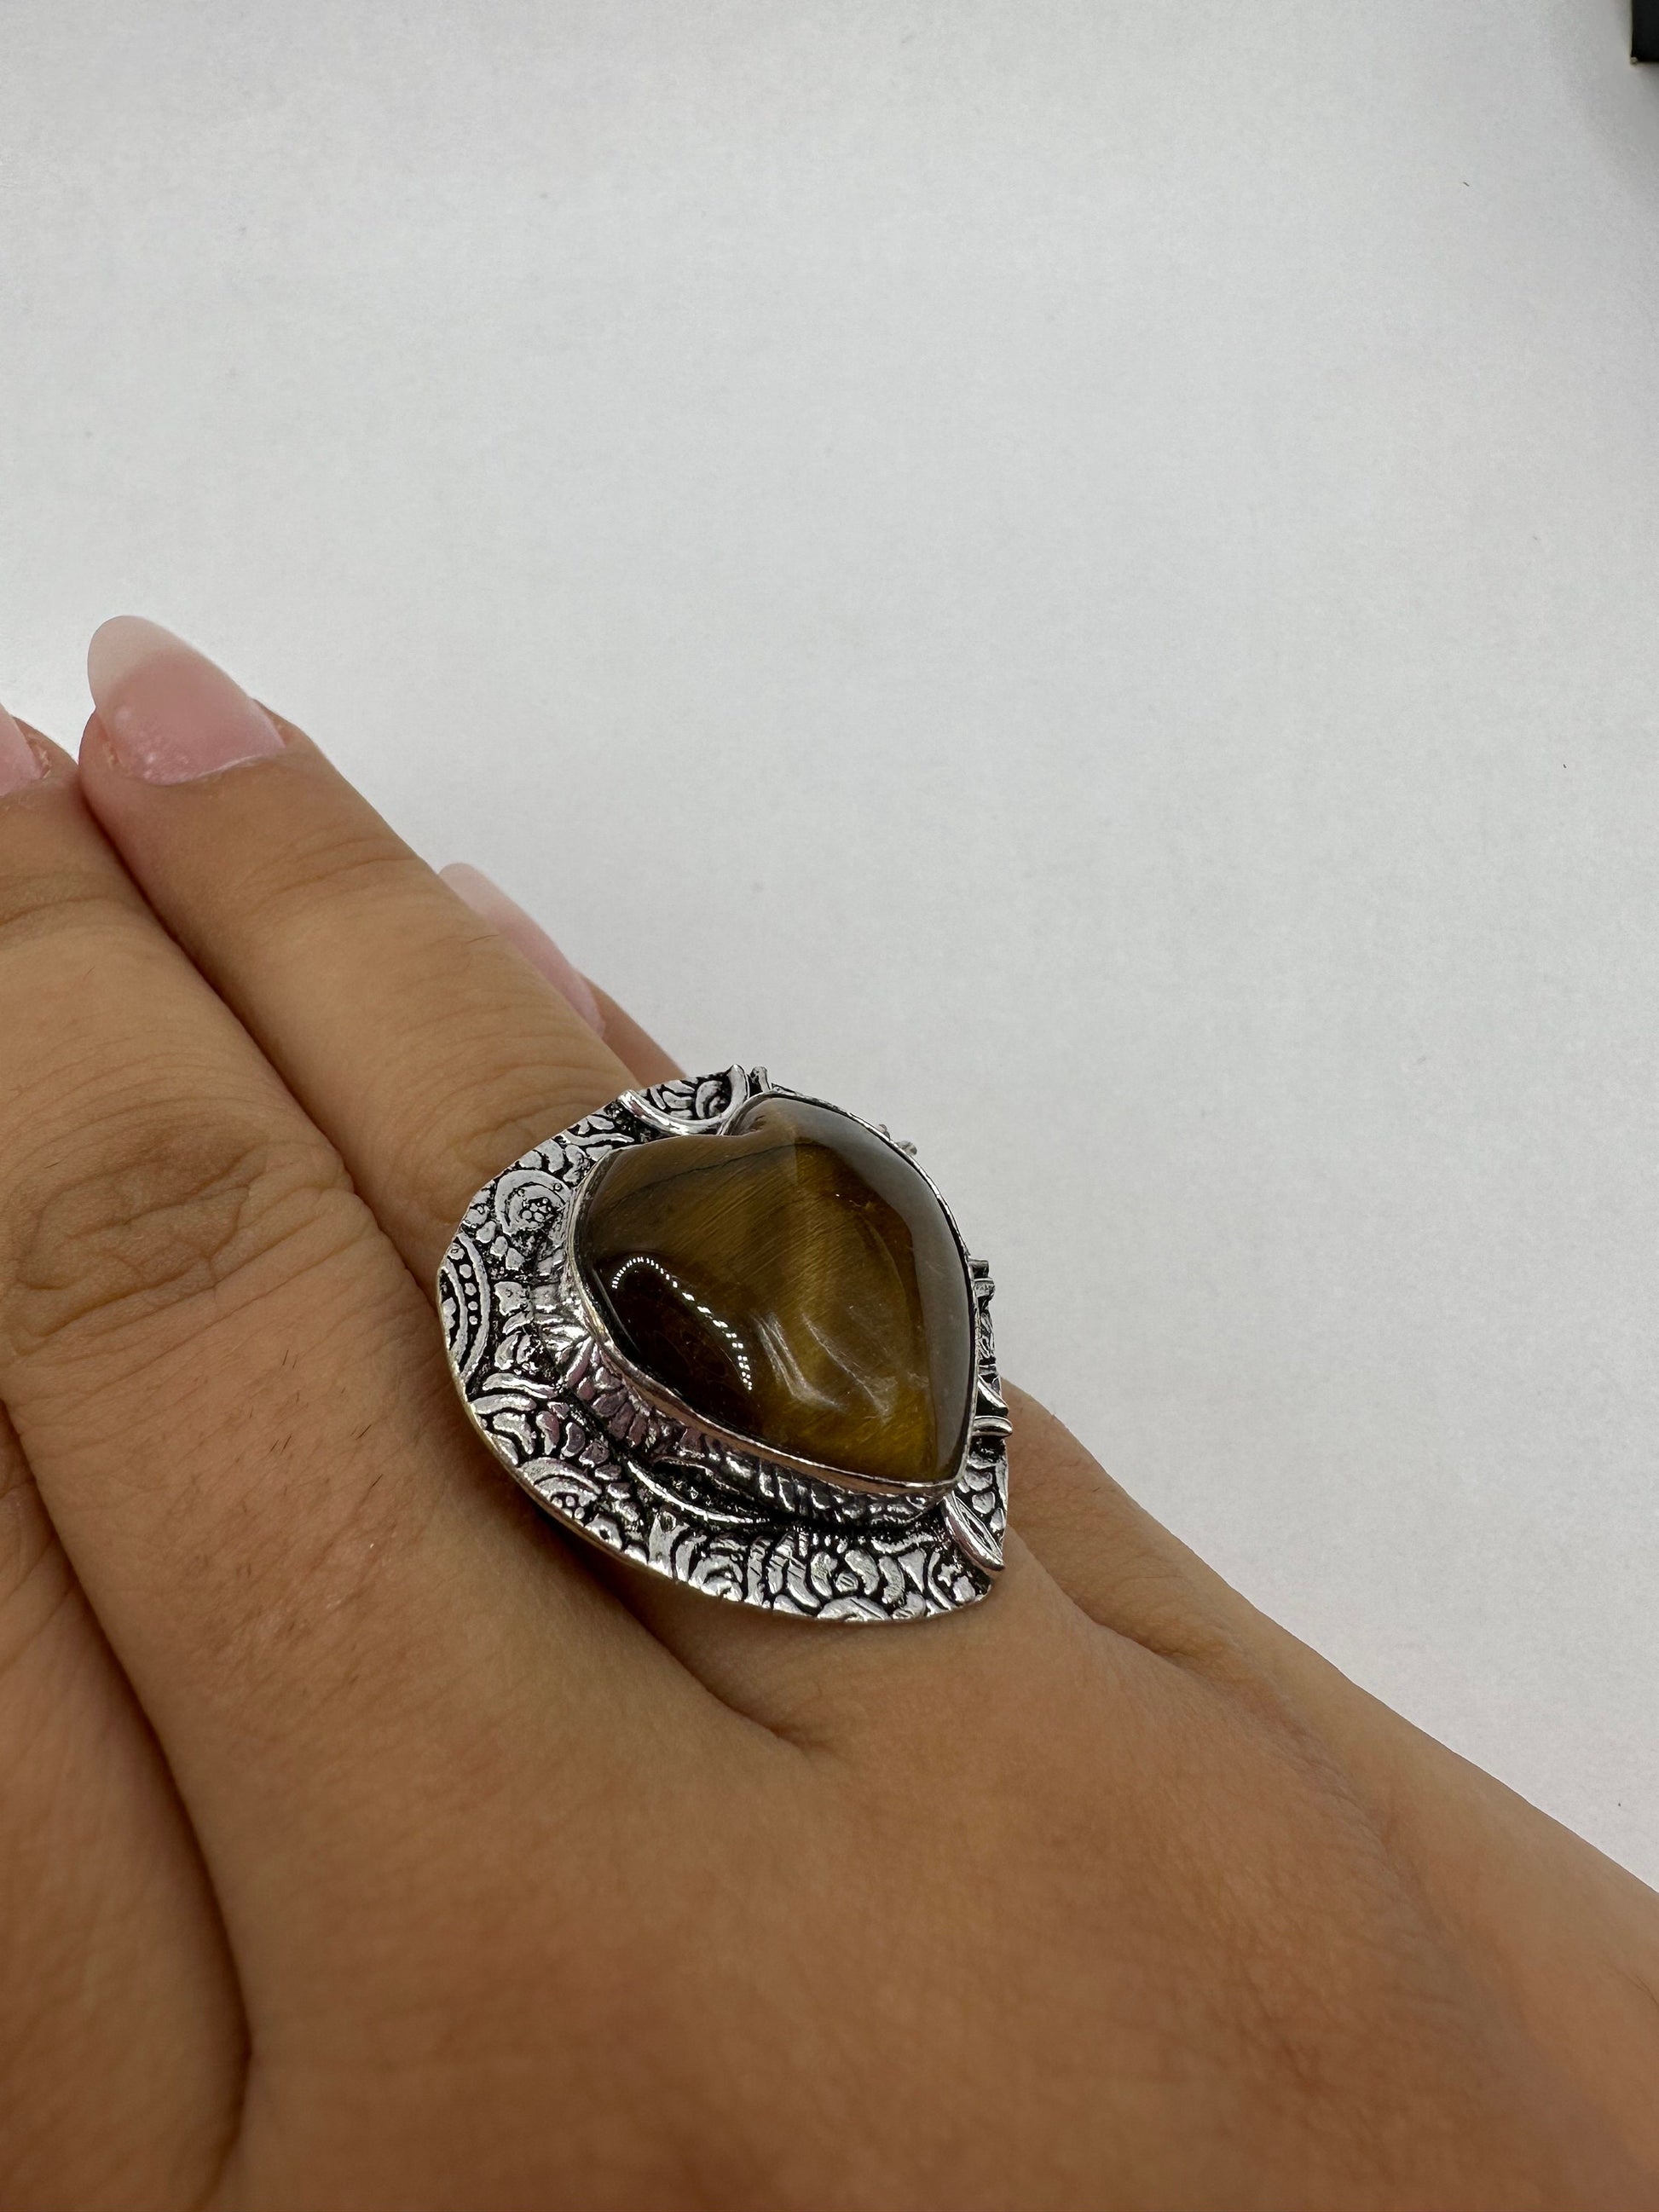 Vintage Heart Tigers Eye Stone Silver Ring